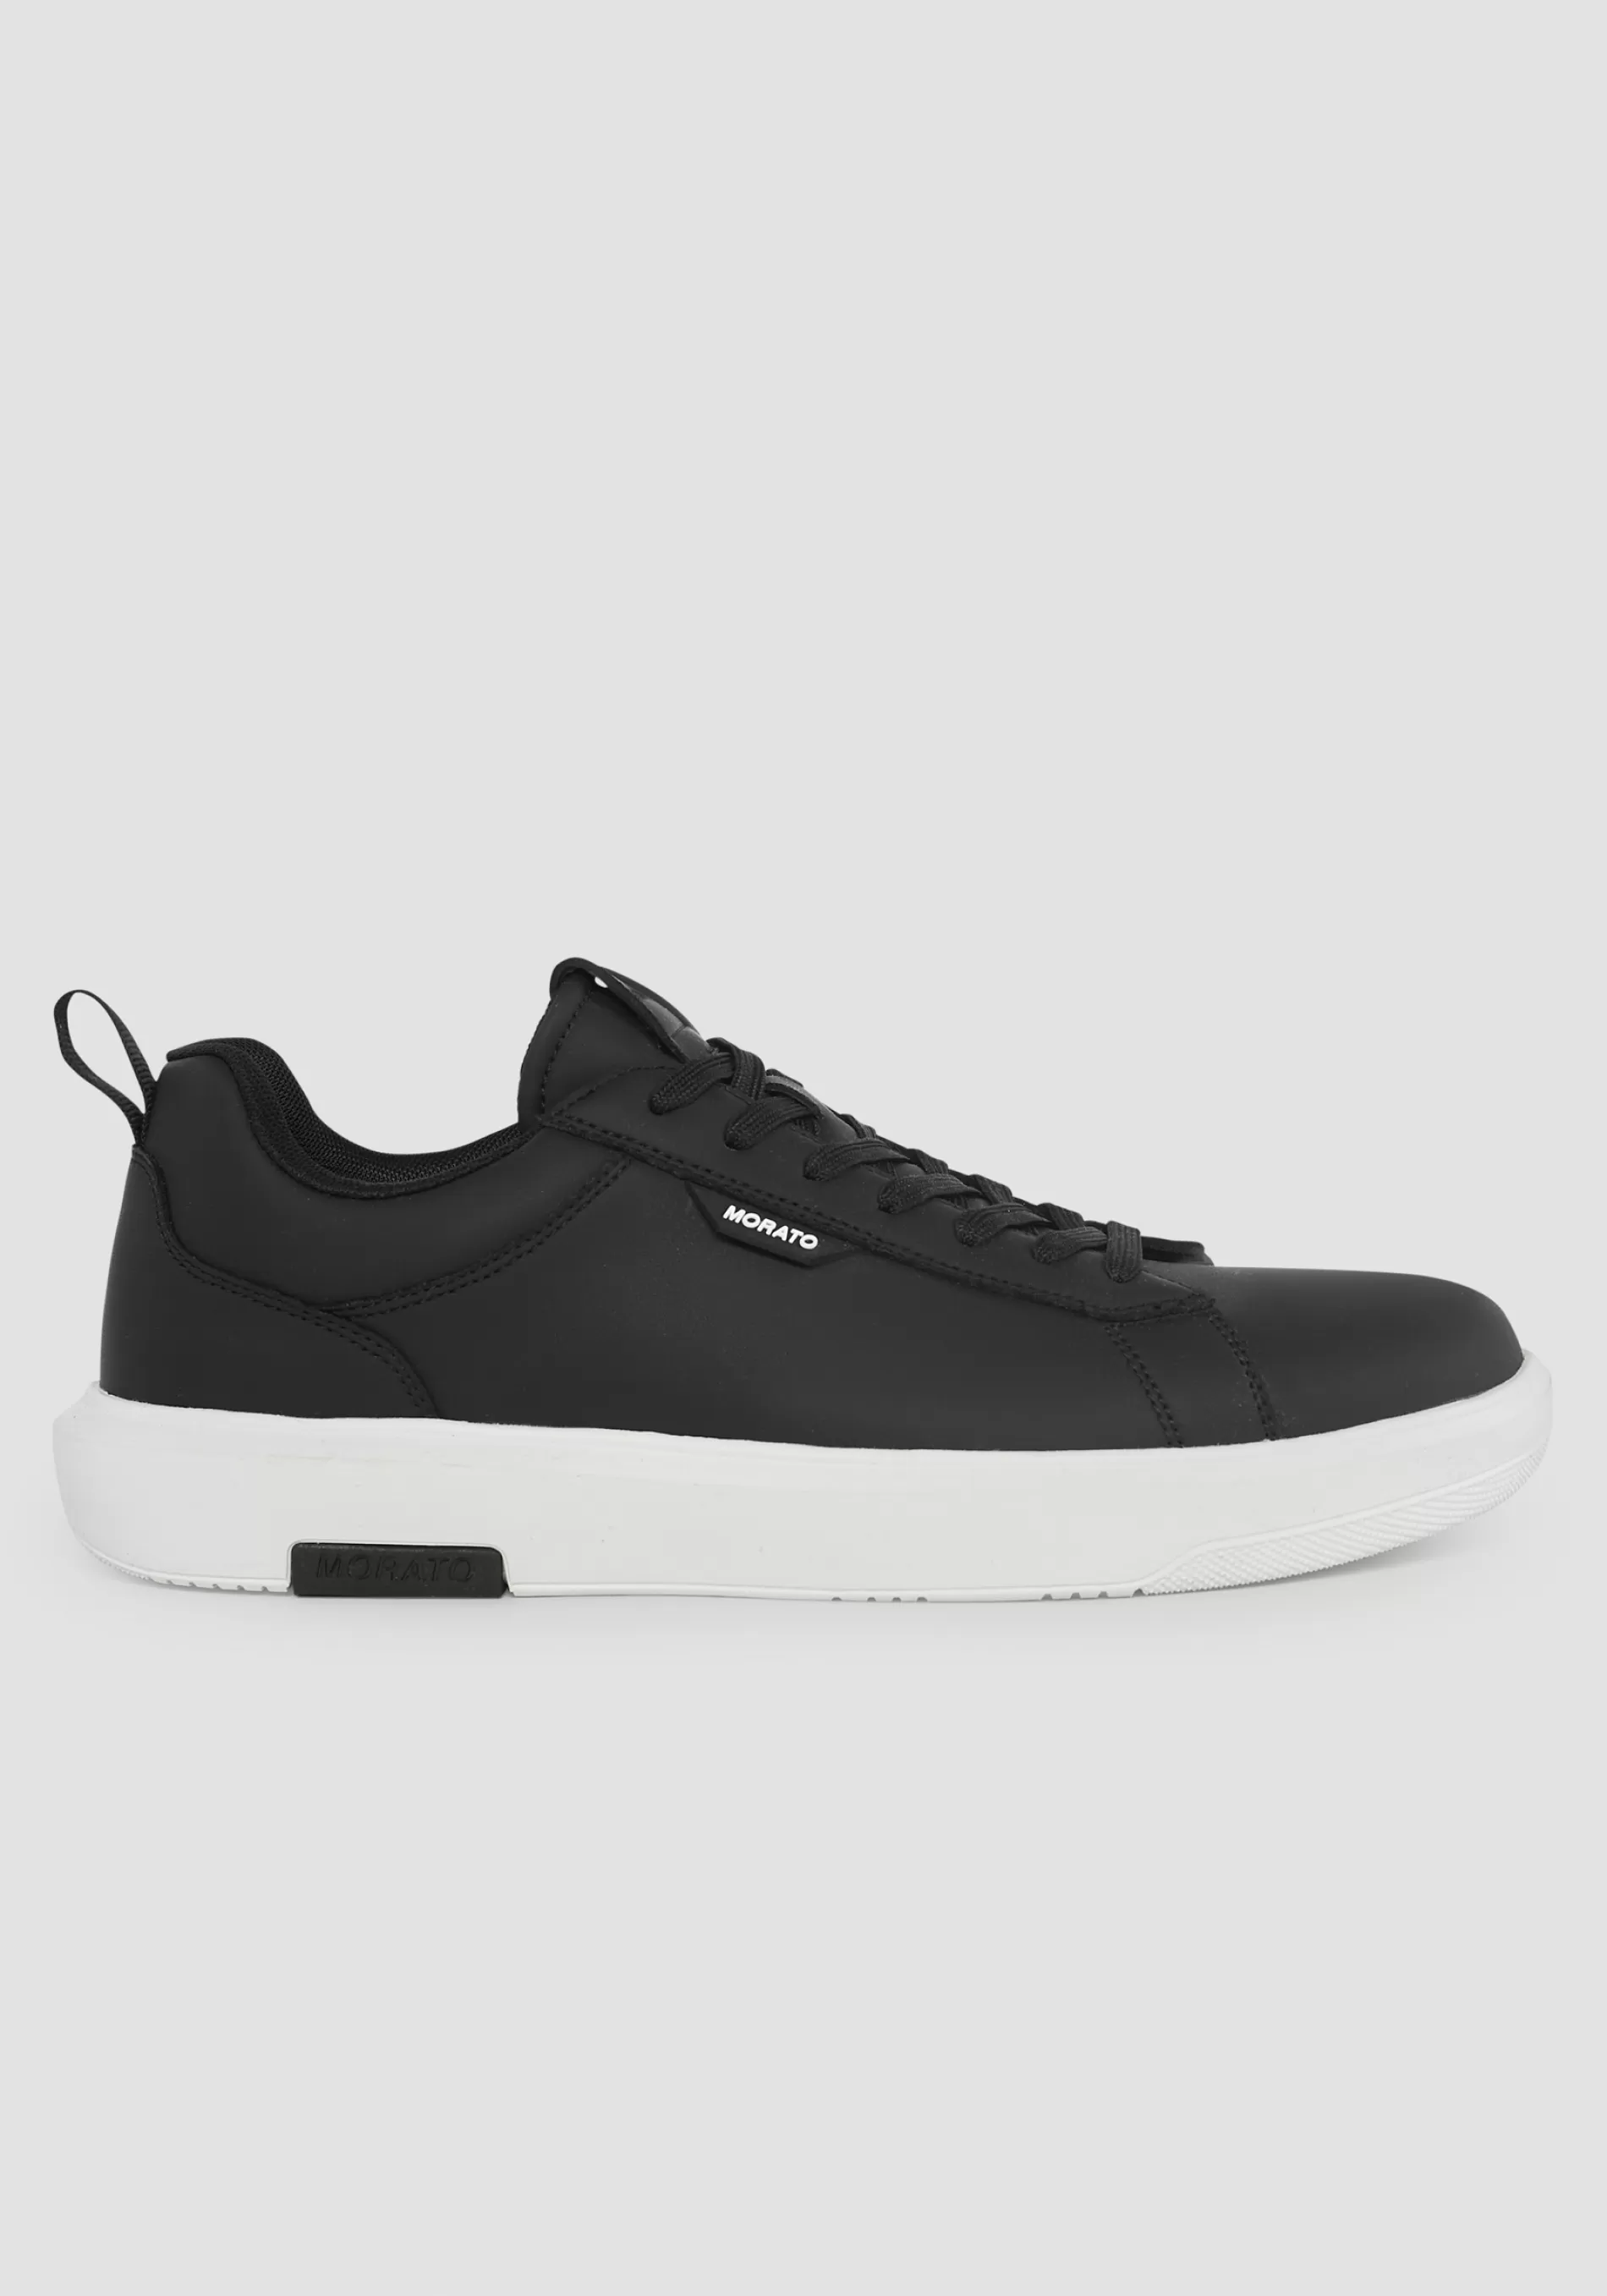 Store "MADISON" LOW-TOP SNEAKER IN FAUX LEATHER Sneakers